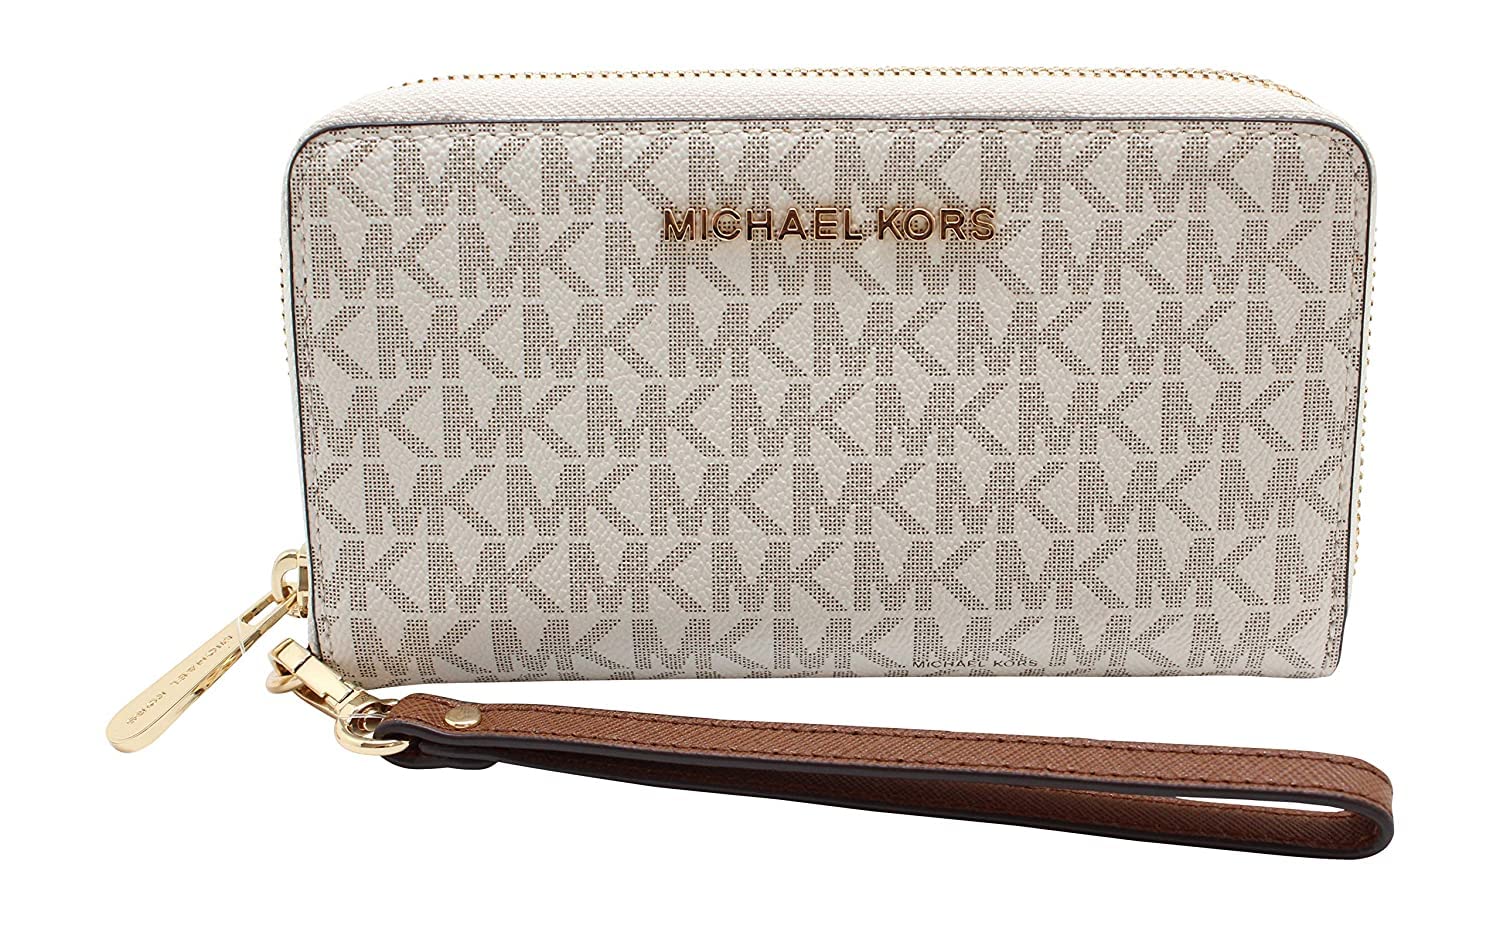 Smartphone accessories for iPhone 12 series from New Yorkbased fashion  brand MICHAEL KORS a popular brand among a wide range of people for its  classy feminine ambience are now available  FOXINC 